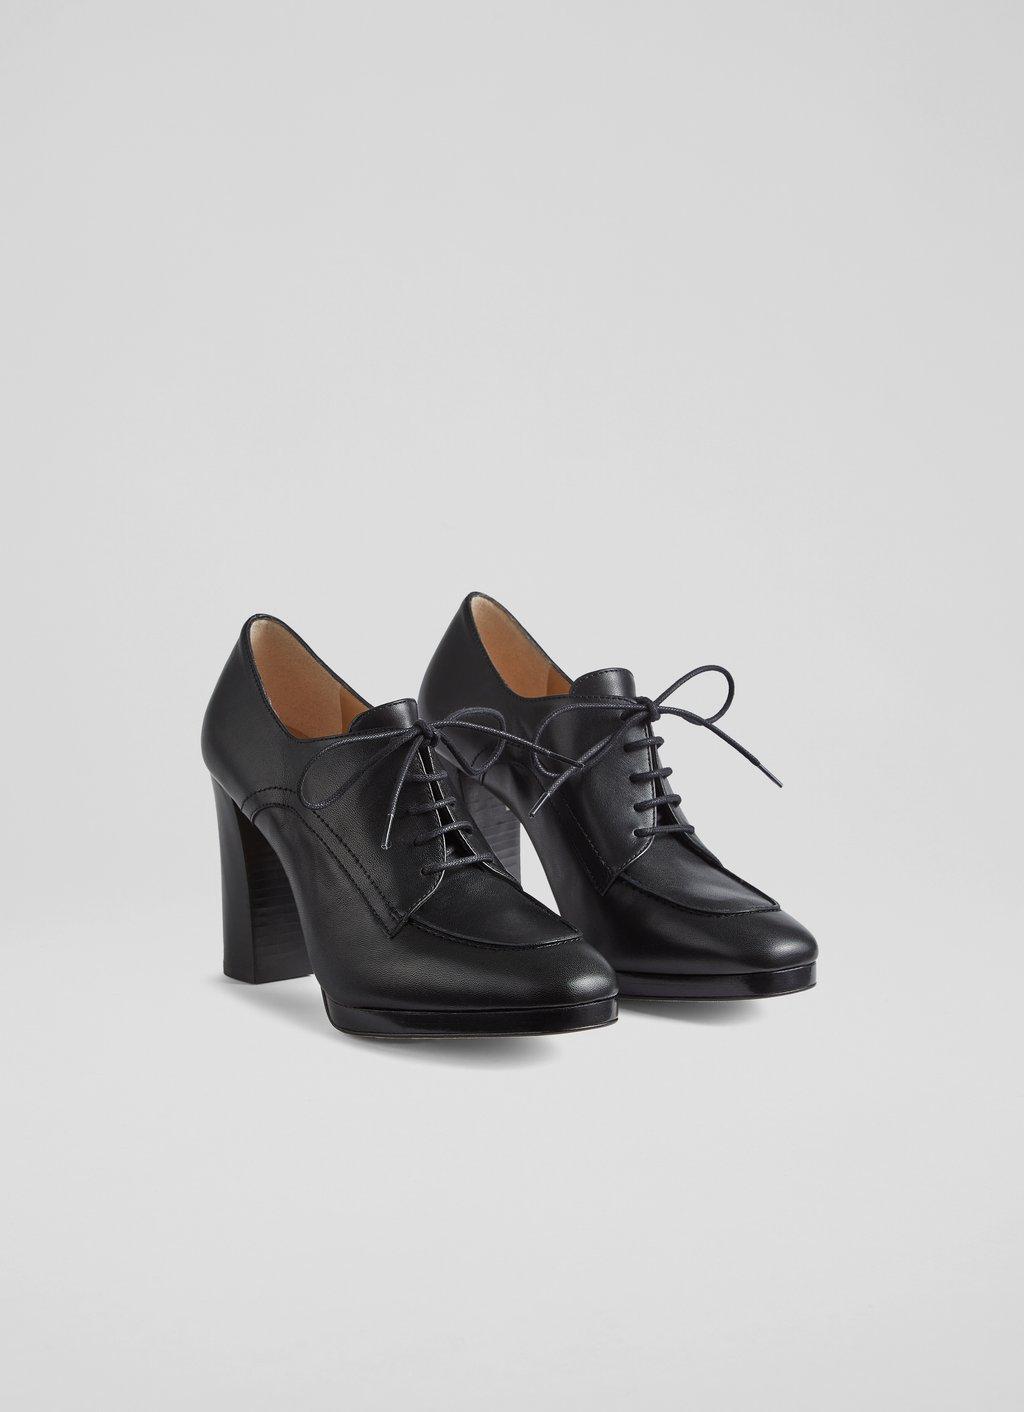 PLATFORM DERBY SHOES WITH BOW from Zara  Oxford shoes, Oxford shoes outfit,  Fashion shoes